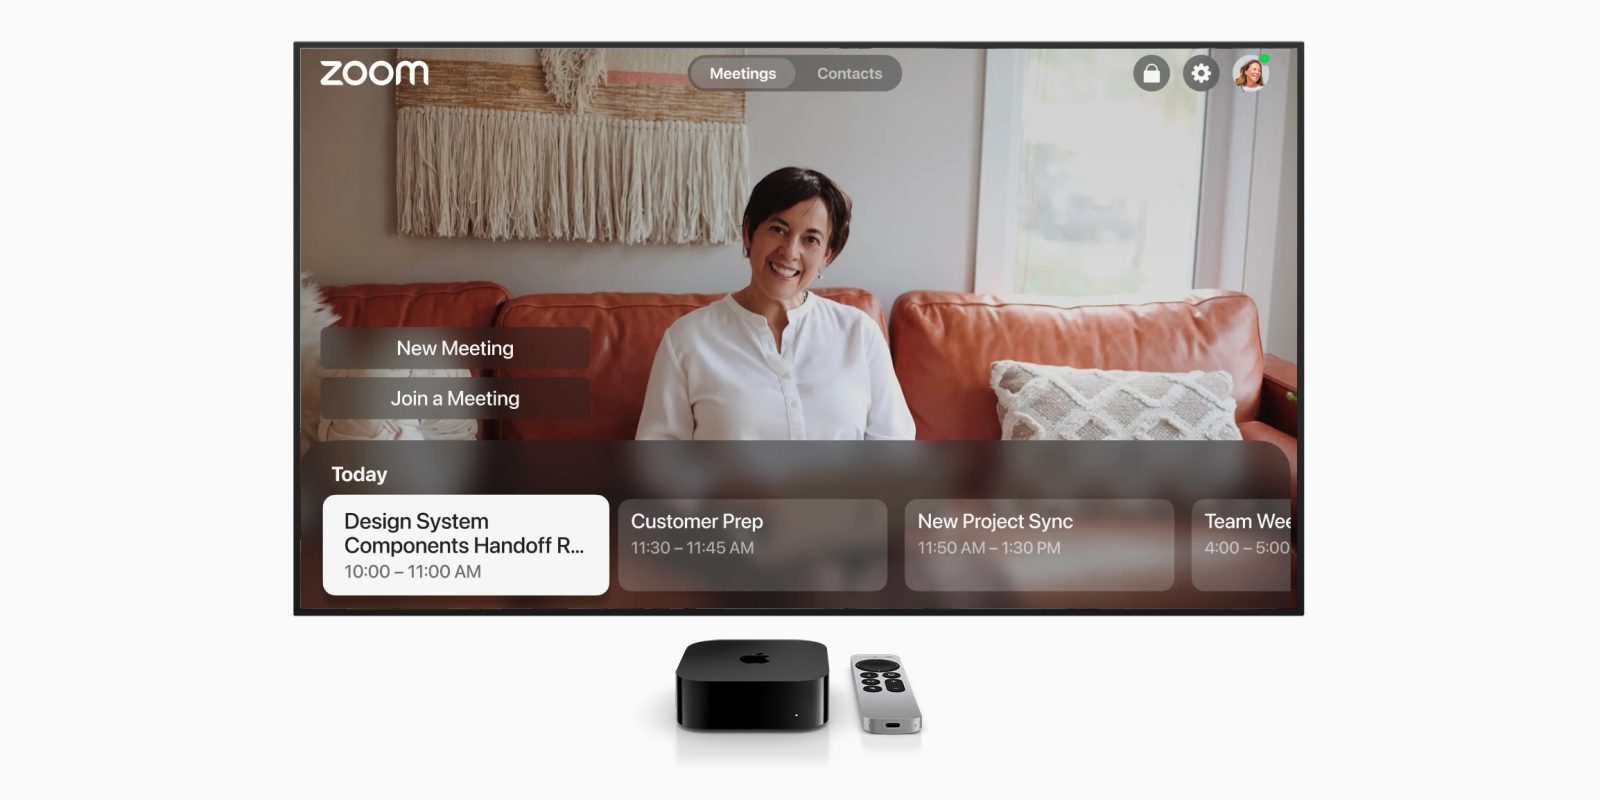 Zoom videoconferencing app now available on Apple TV